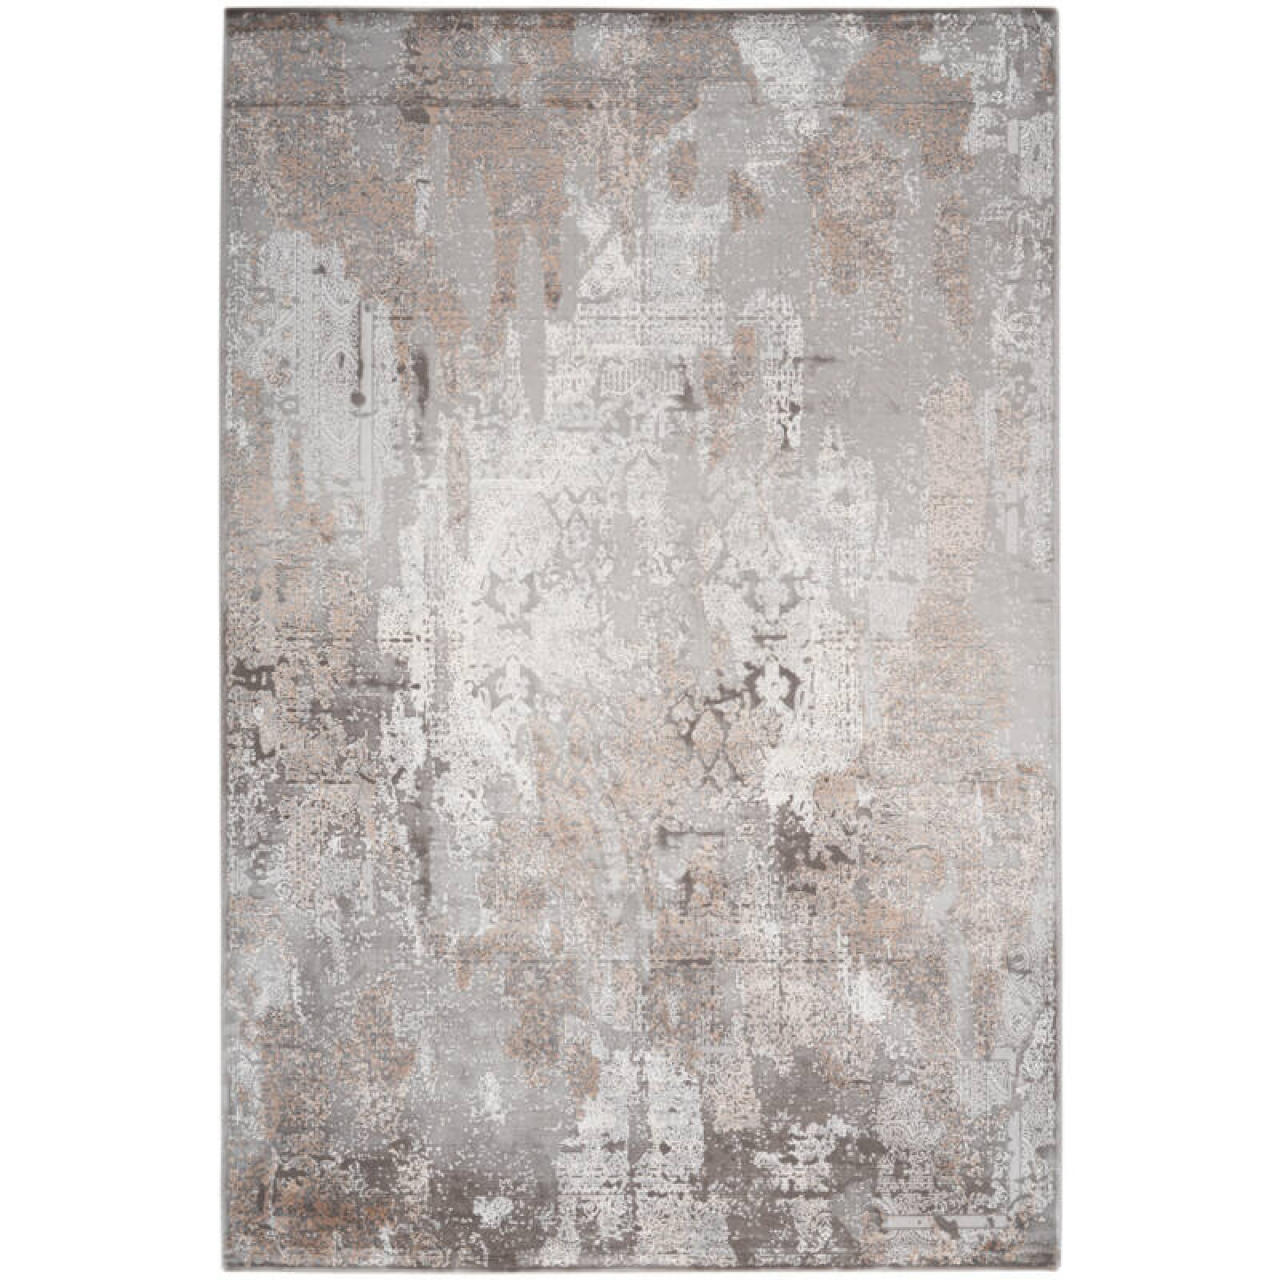 Obsession Haute Couture Jewel 951 Taupe szőnyeg-140x200